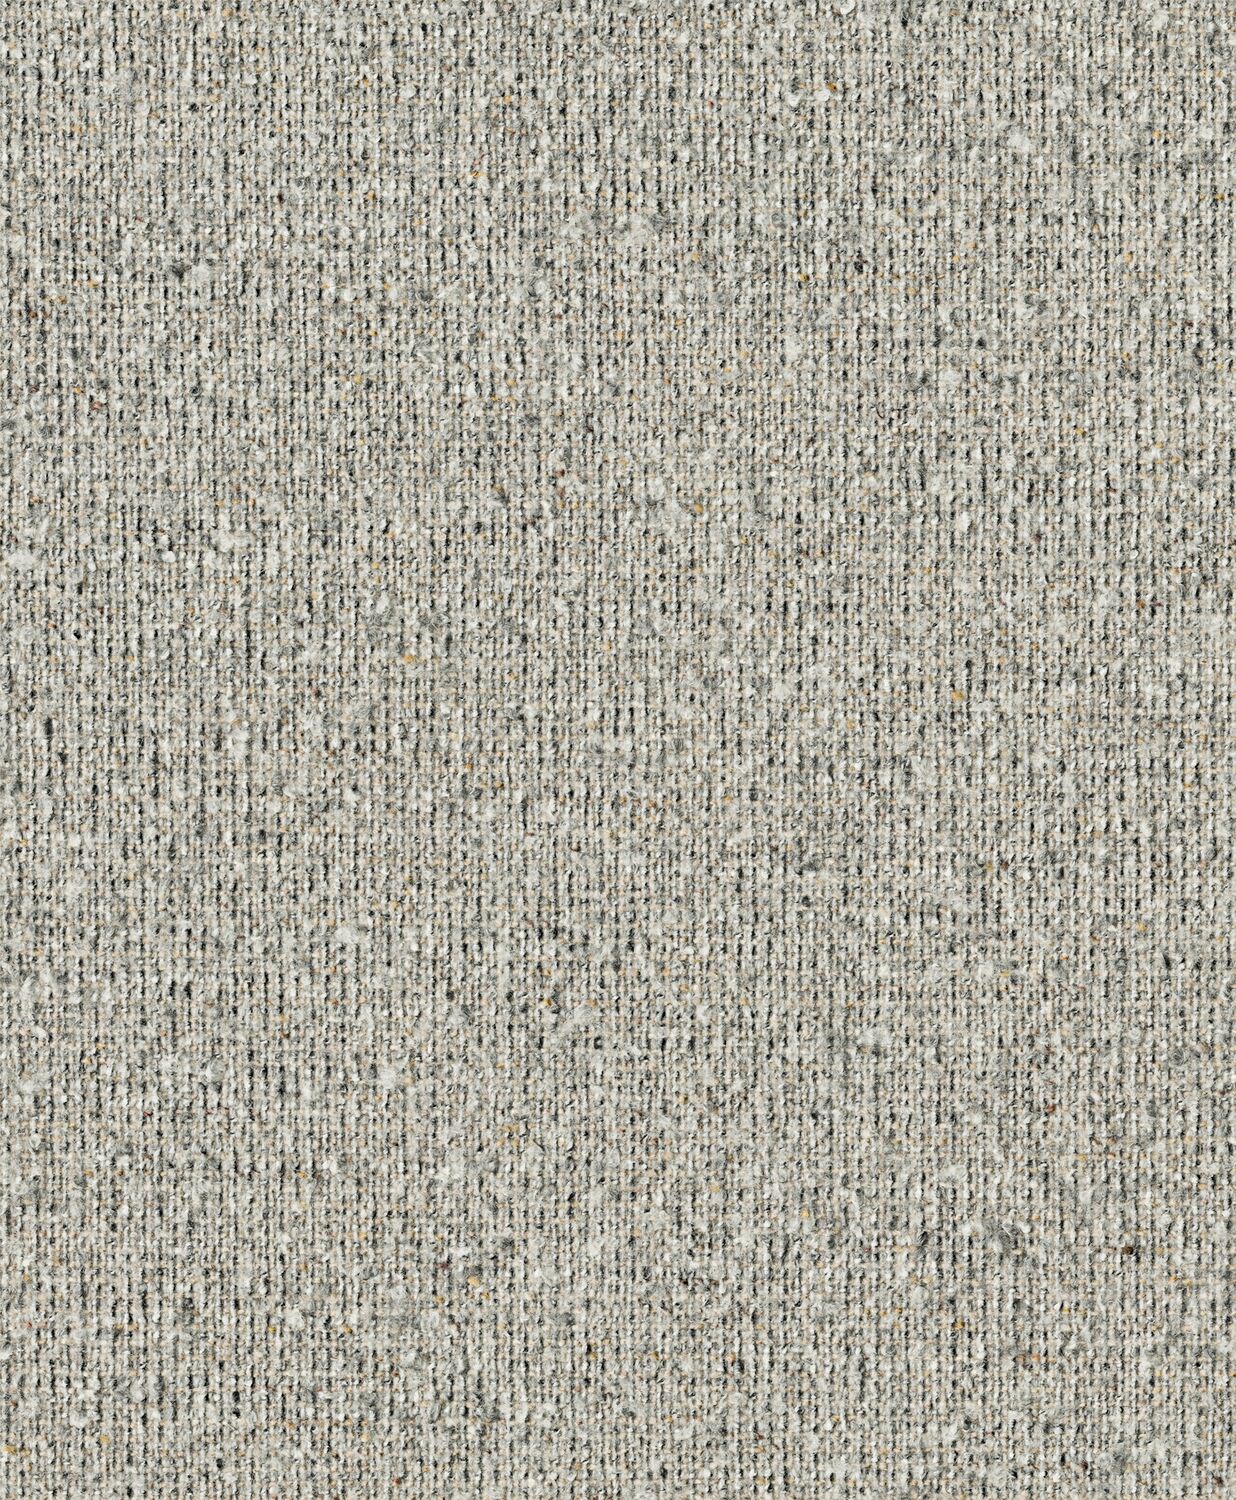 Everyday Boucle - Silver Aster - 4111 - 04 Tileable Swatches